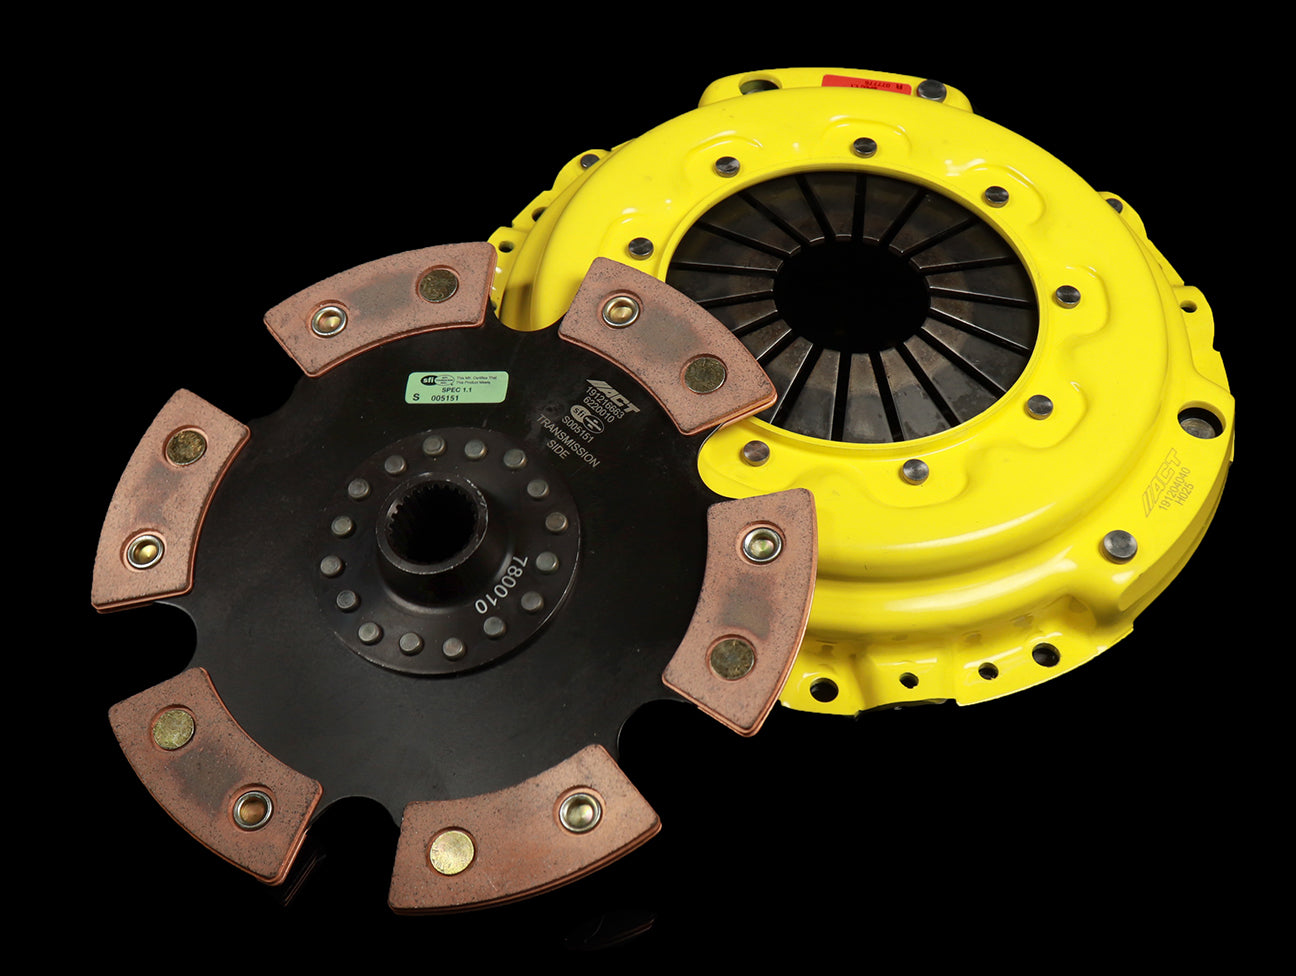 Mean (±SE) clutch size of first and second clutches a Apostiça and b